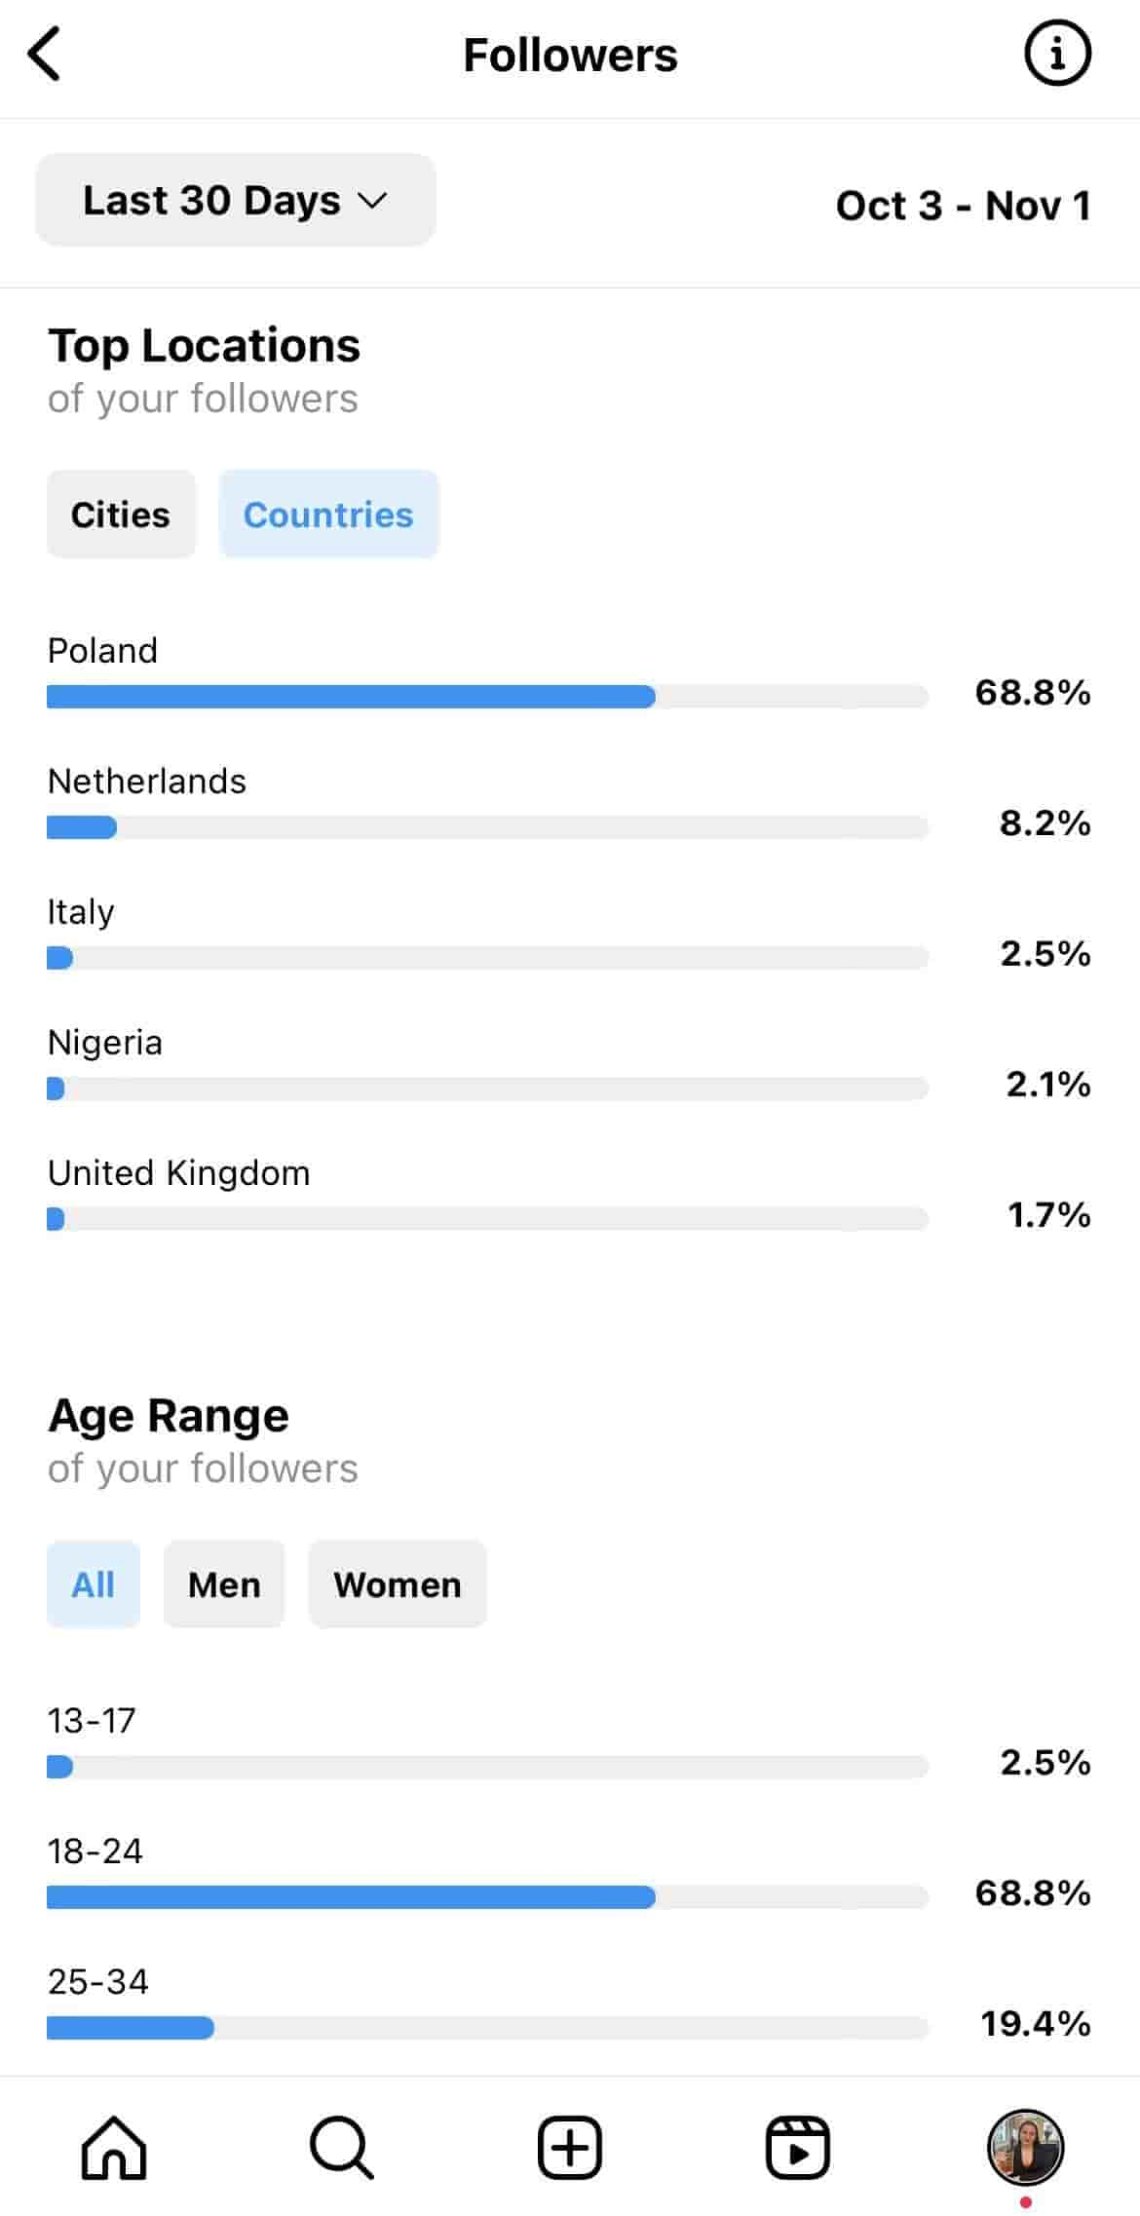 Follwers' demographics provided by Instagram